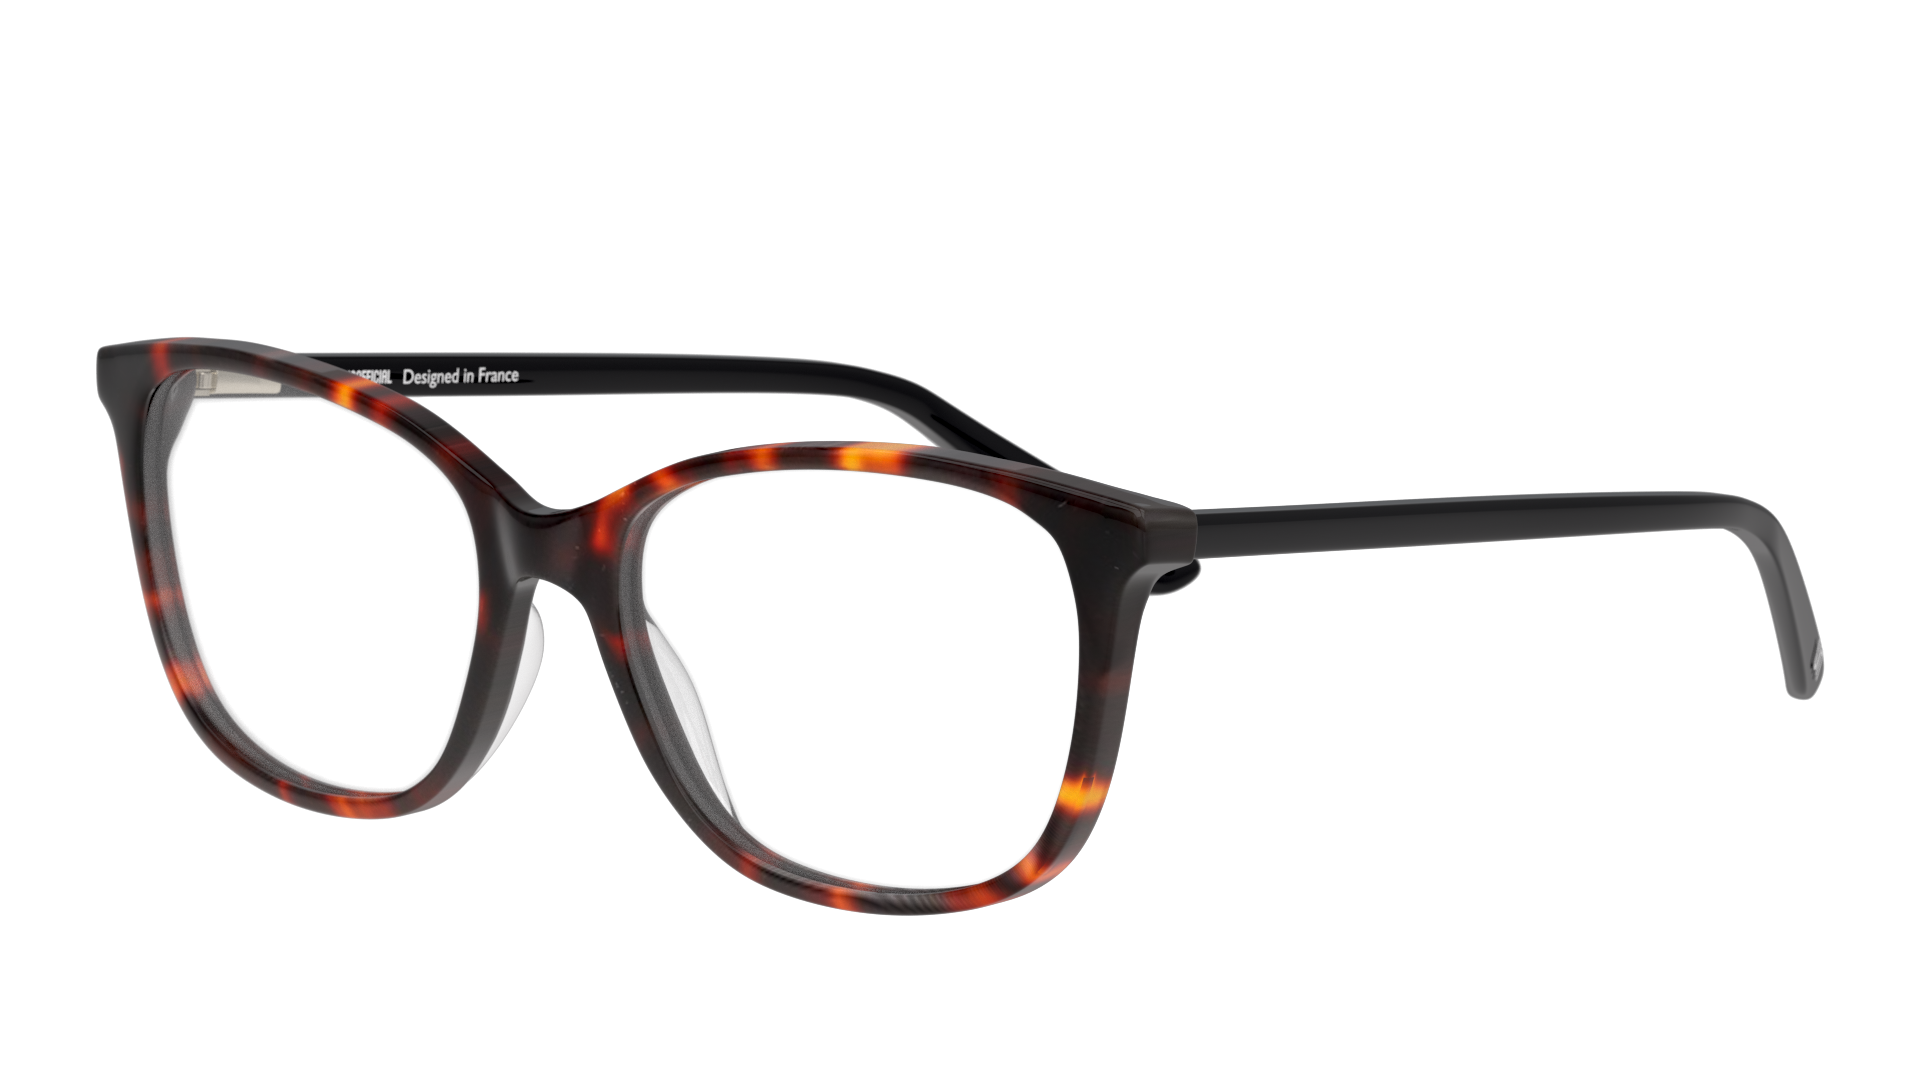 Angle_Left01 Unofficial UNOF0035 (HB00) Glasses Transparent / Tortoise Shell